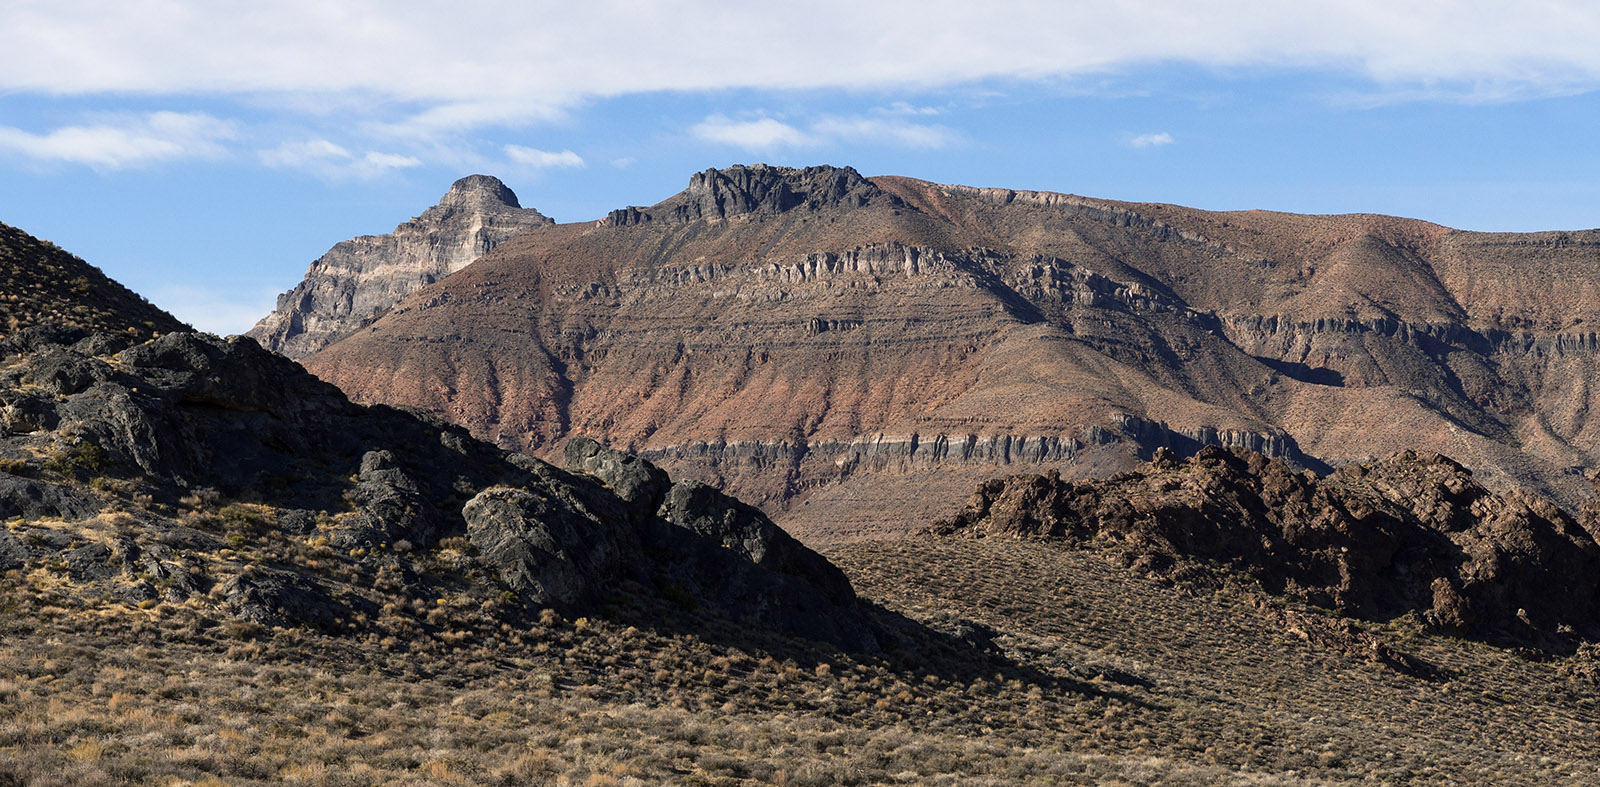 The highest peak on the left and to the rear is Thimble peak which is composed of Bonanza King Formation (Thick dolomite with thinner layers of limestone and shale from the mid to upper Cambrian Period, Paleozoic Era about 450 to 500 MA).  The wide mountain in front of Thimble Peak with horizontal strata is Carrera Formation shale and limestone from the mid to lower Cambrian period.  Foreground contains Tertiary volcanic rock on the left and Zabriskie Quartzite (lower Cambrian Period) on the right.